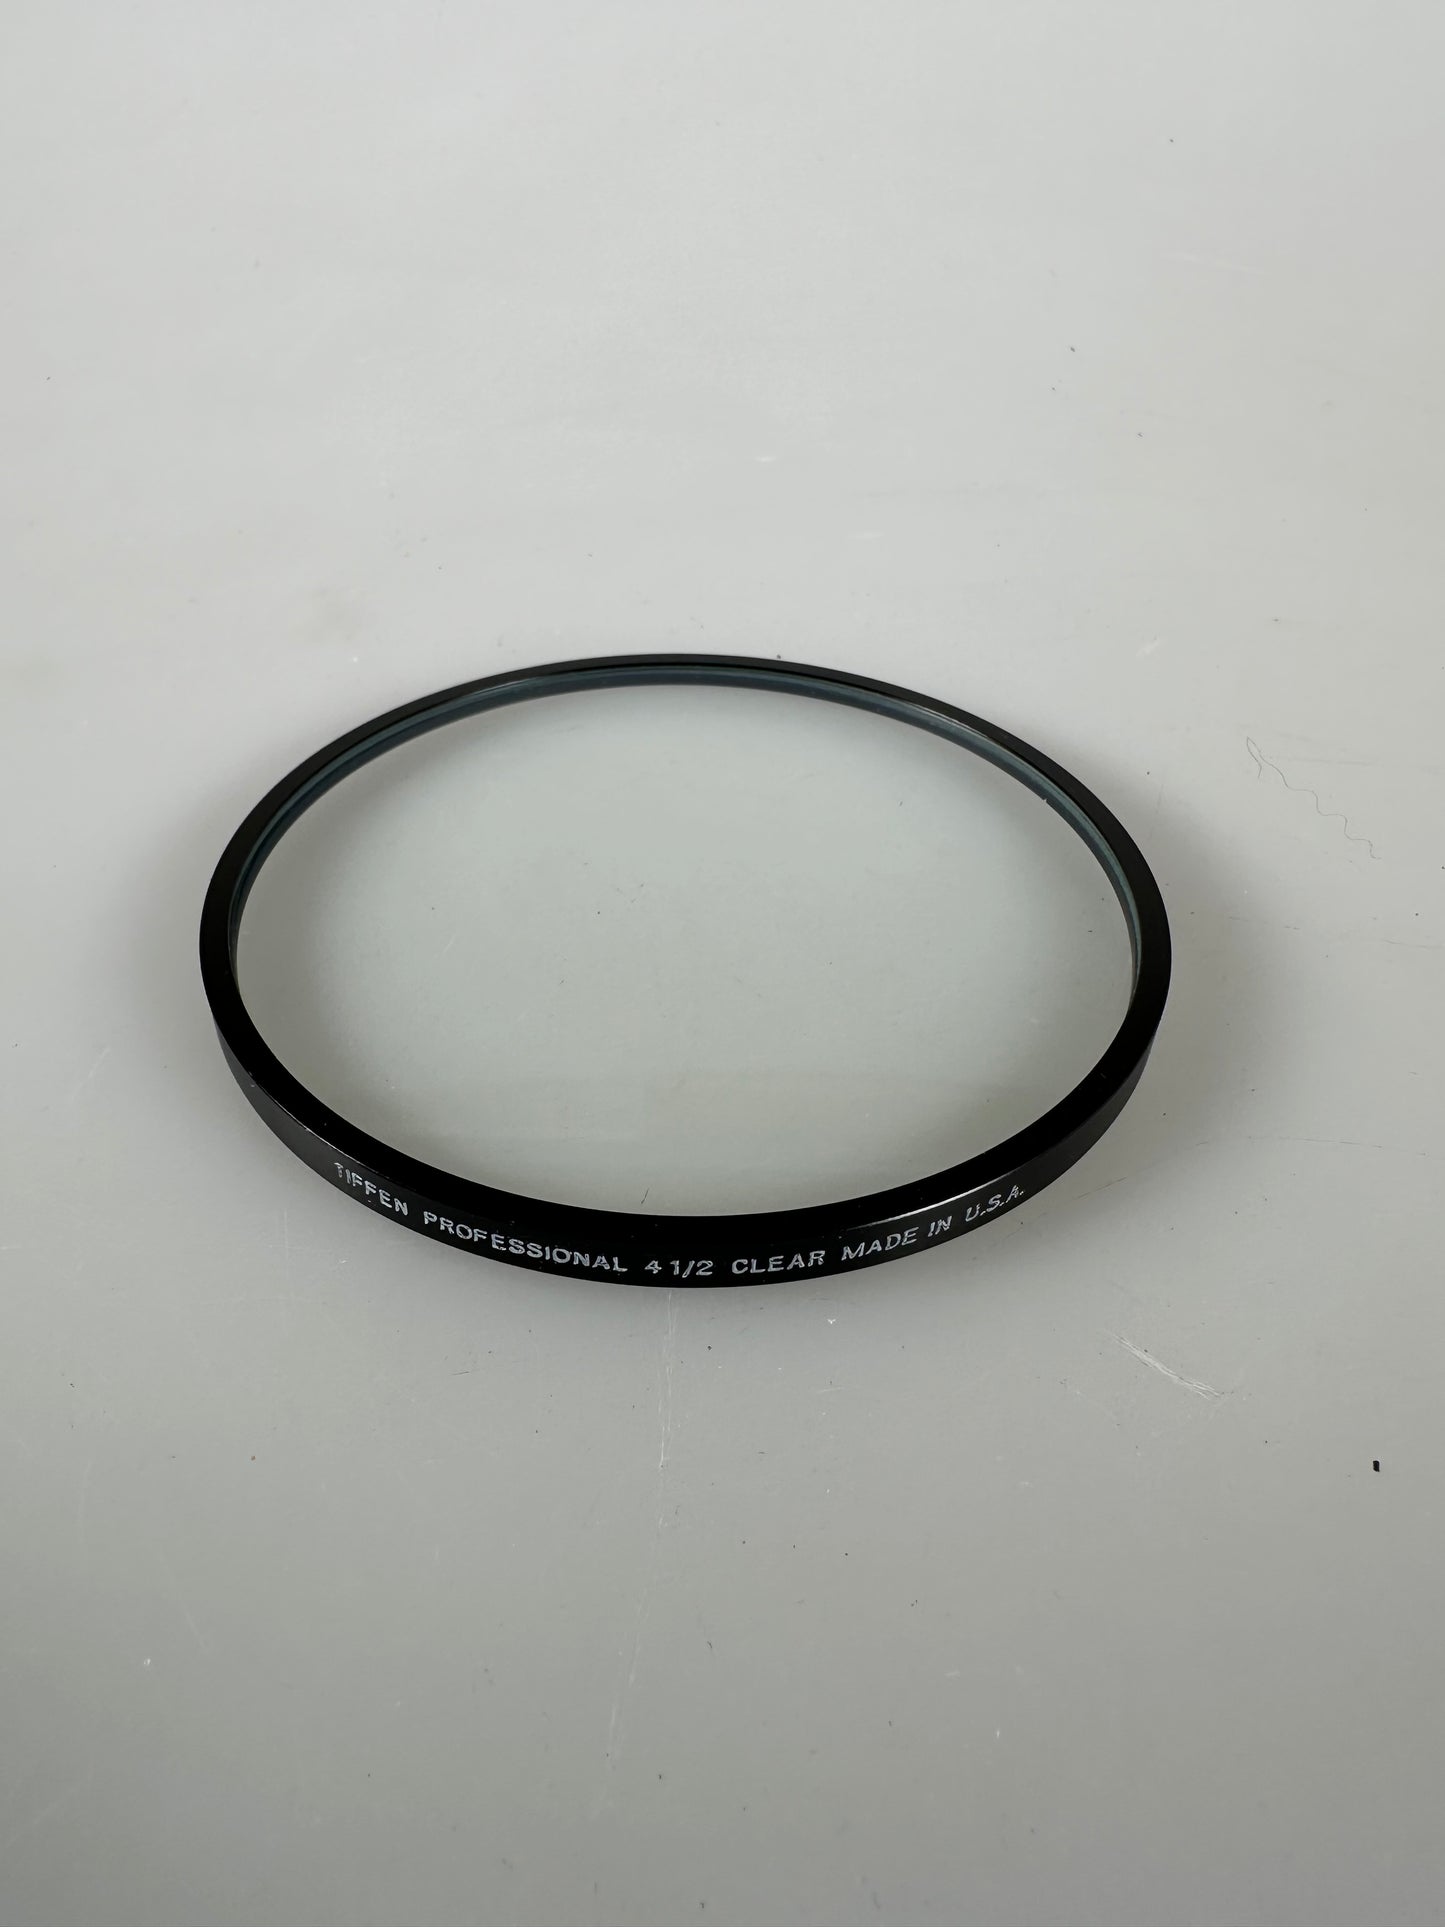 TIFFEN Professional 4 1/2" 4.5" Round Clear Filter